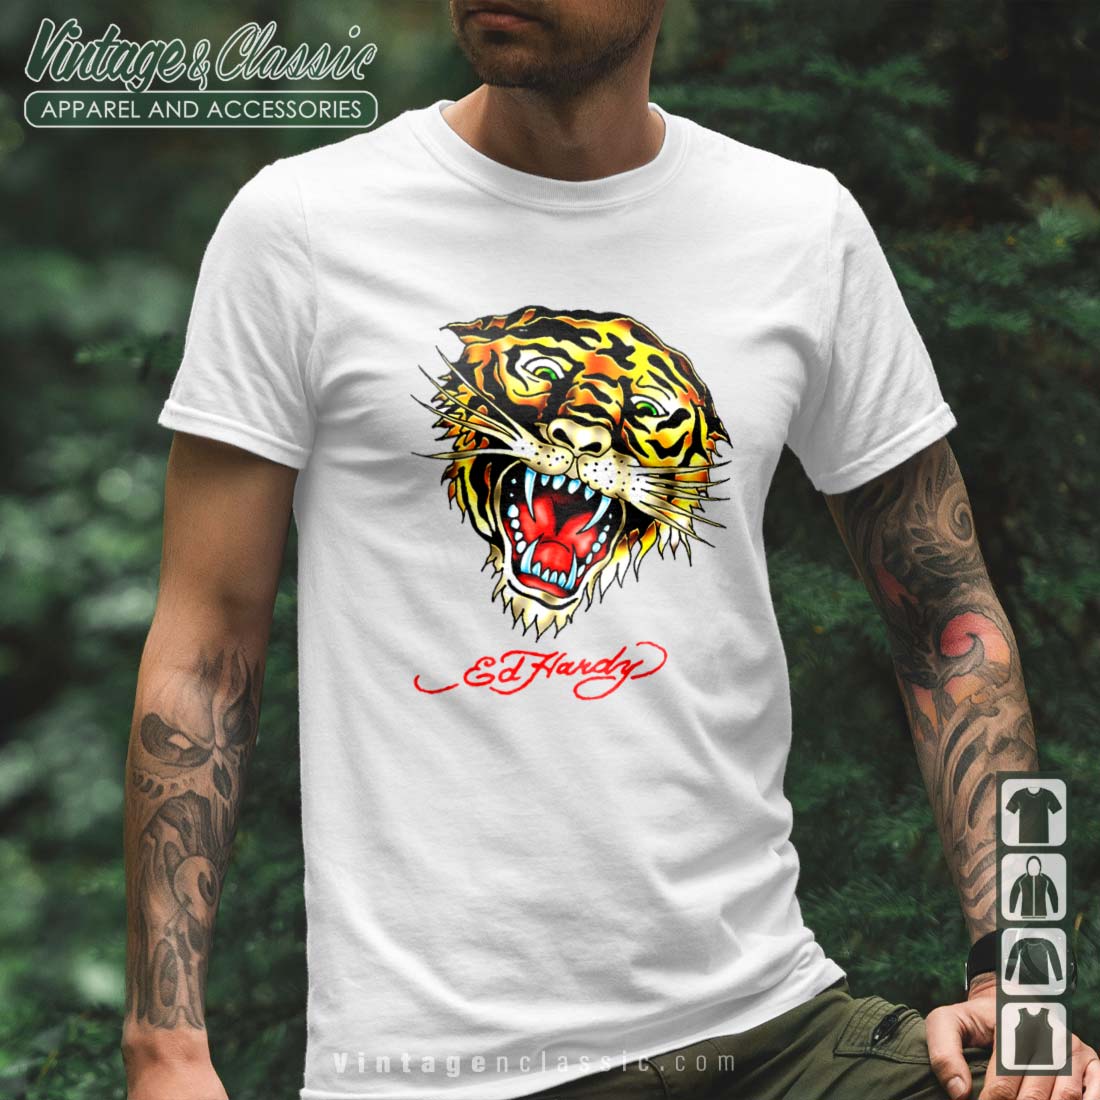 Ed Hardy Indias Official Online Store at NNNOWcom